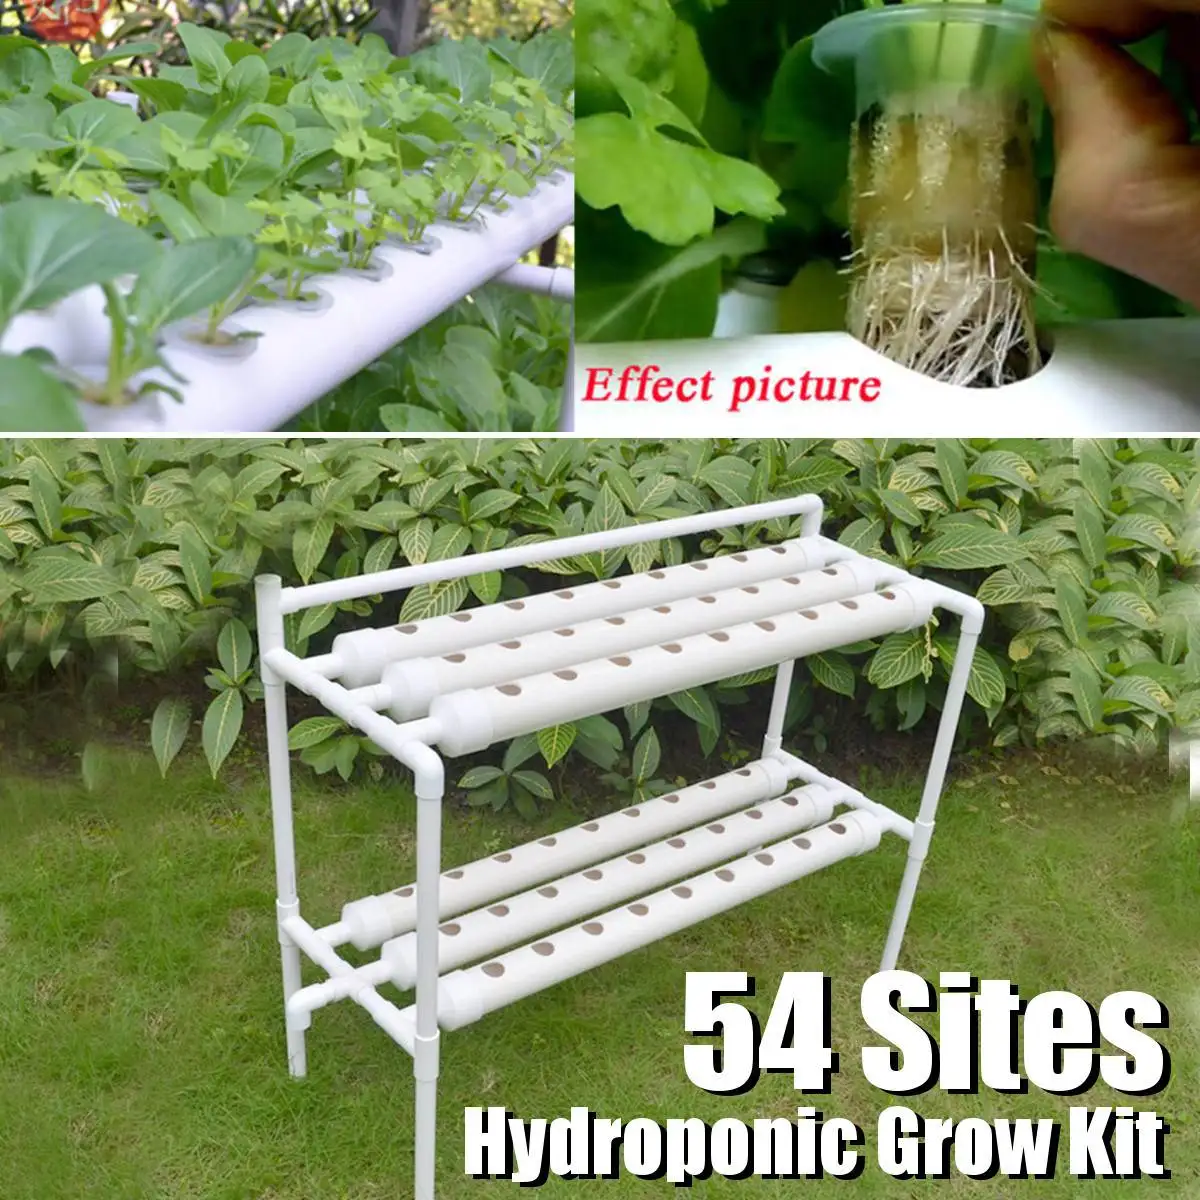 

54 Sites Plant Hydroponic Systems Grow Kit Nursery Pots Anti Pest Soilless Cultivation Indoor Garden Culture Planter Vegetables